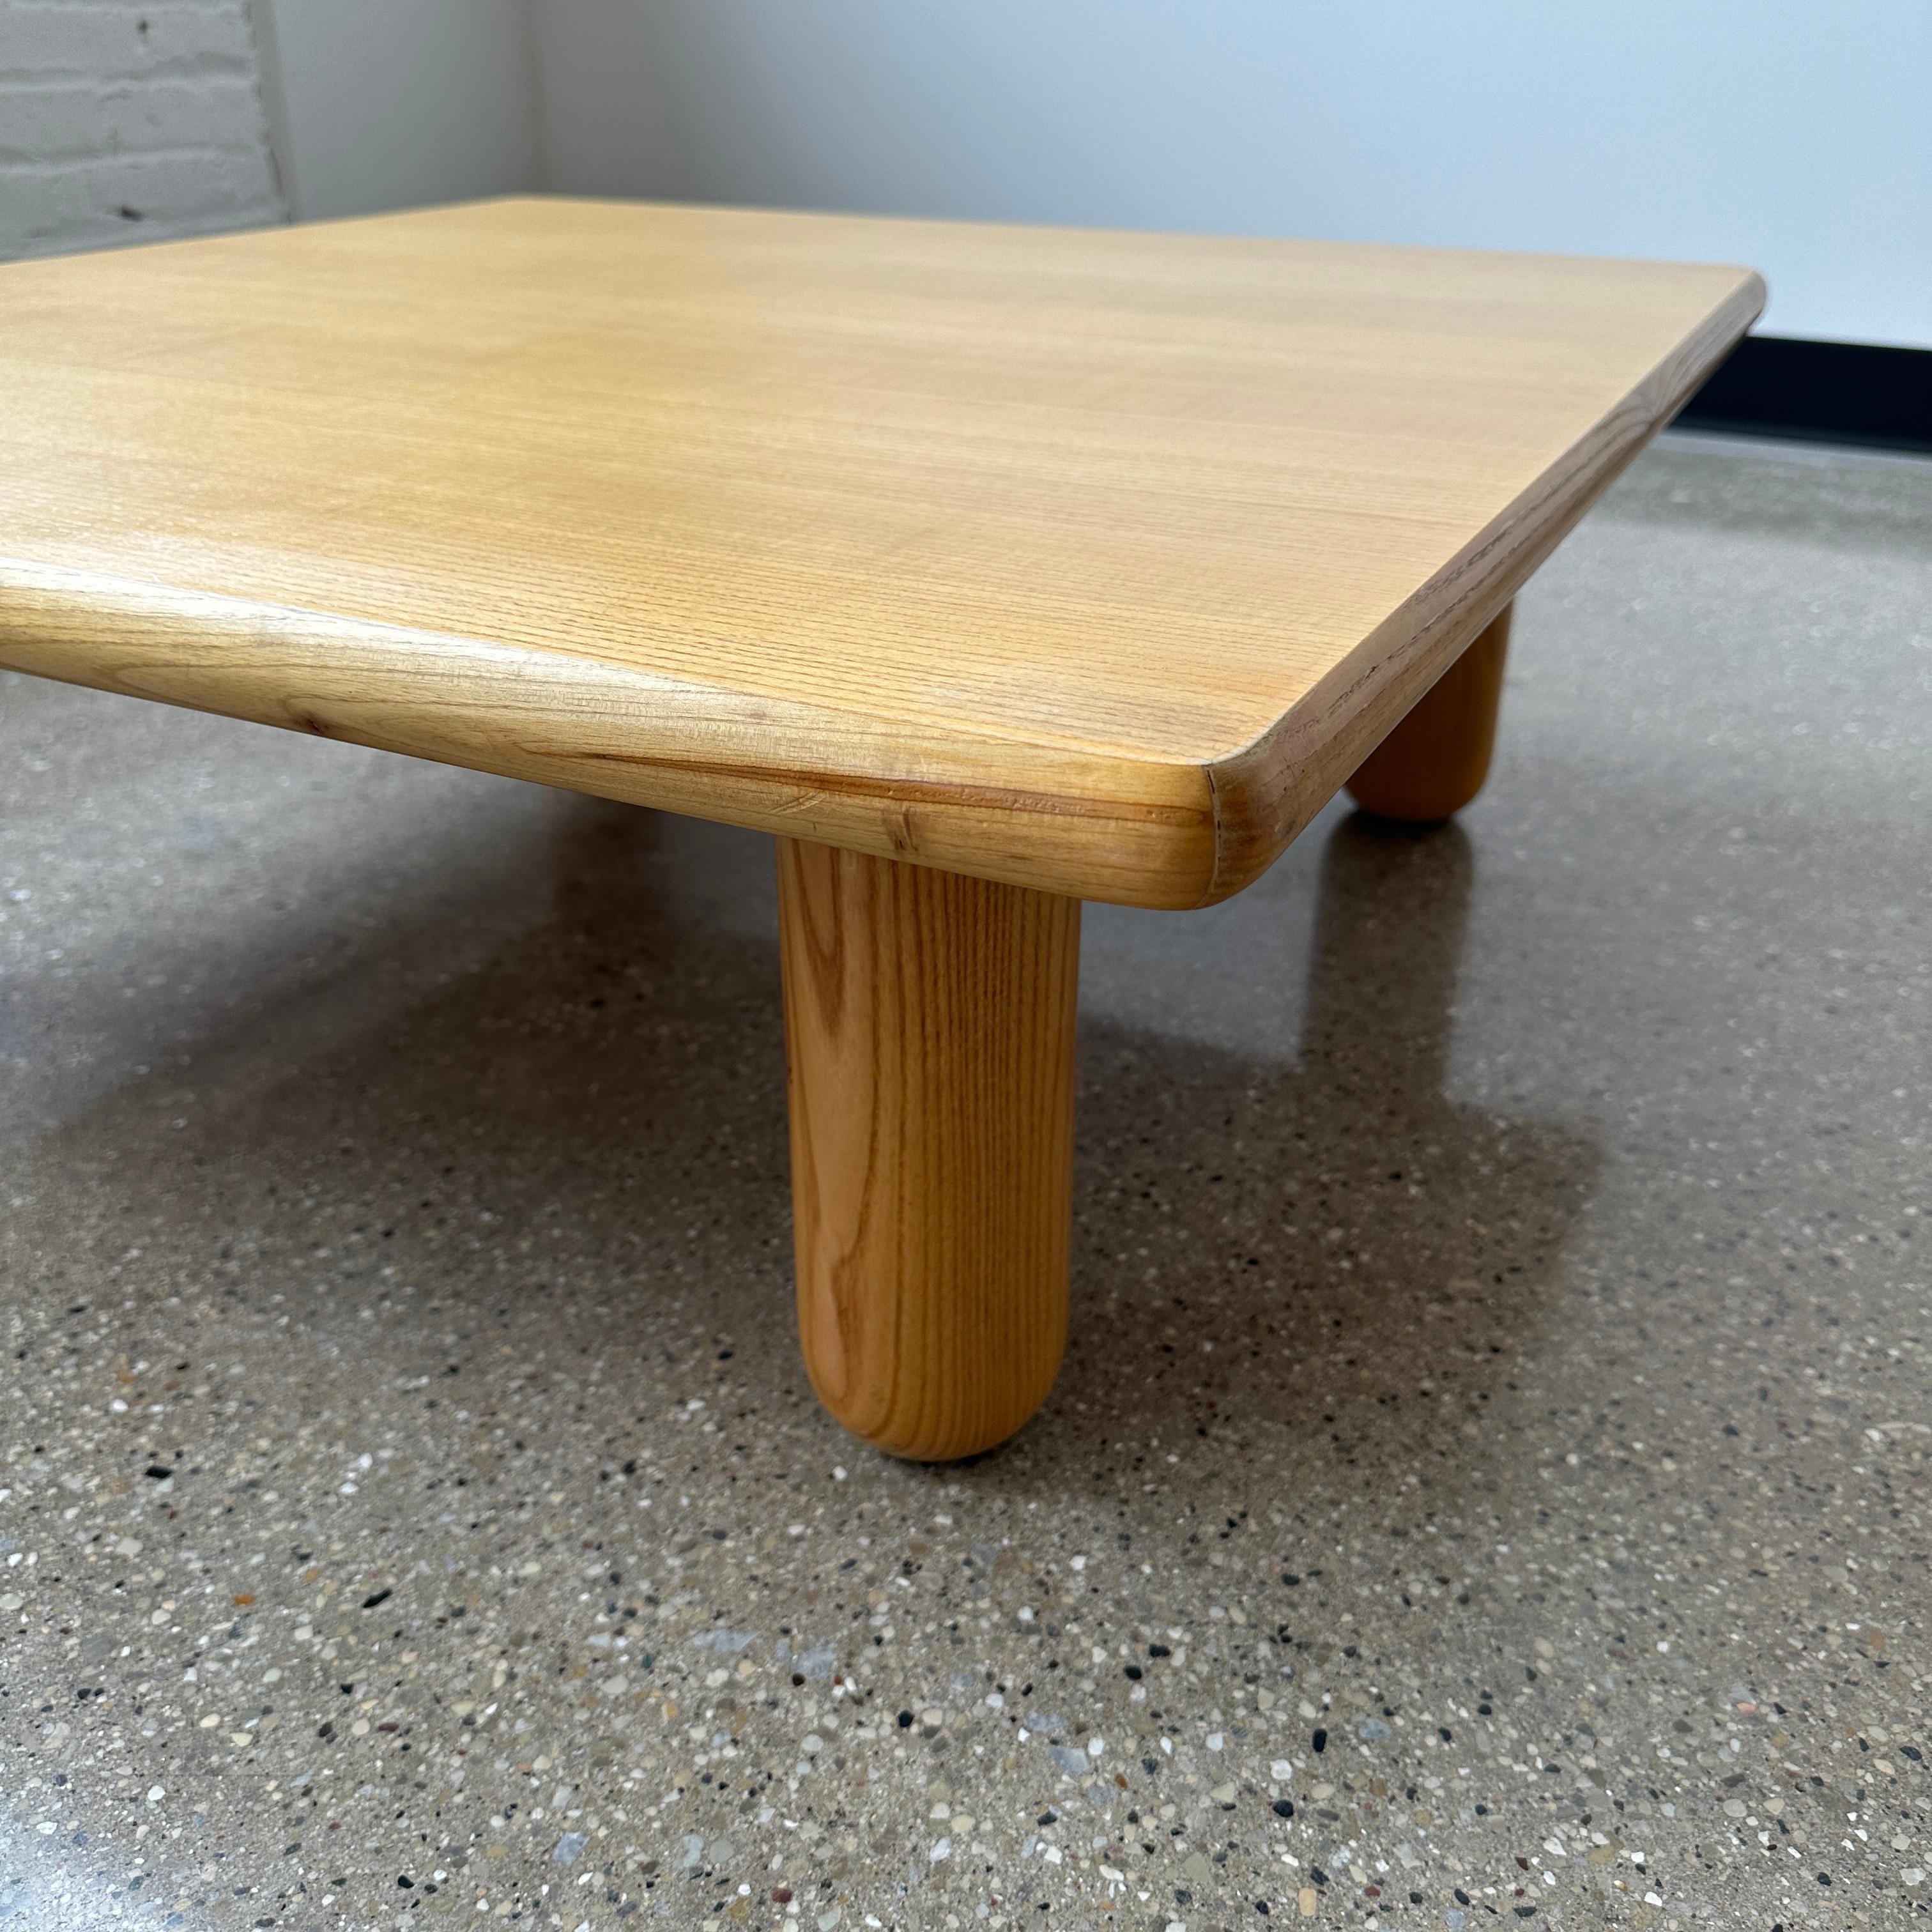 c. 1970s, Italy in great vintage condition. This piece features exceptional craftsmanship and a lightly toned tabletop that helps emphasize the oak grain on the legs